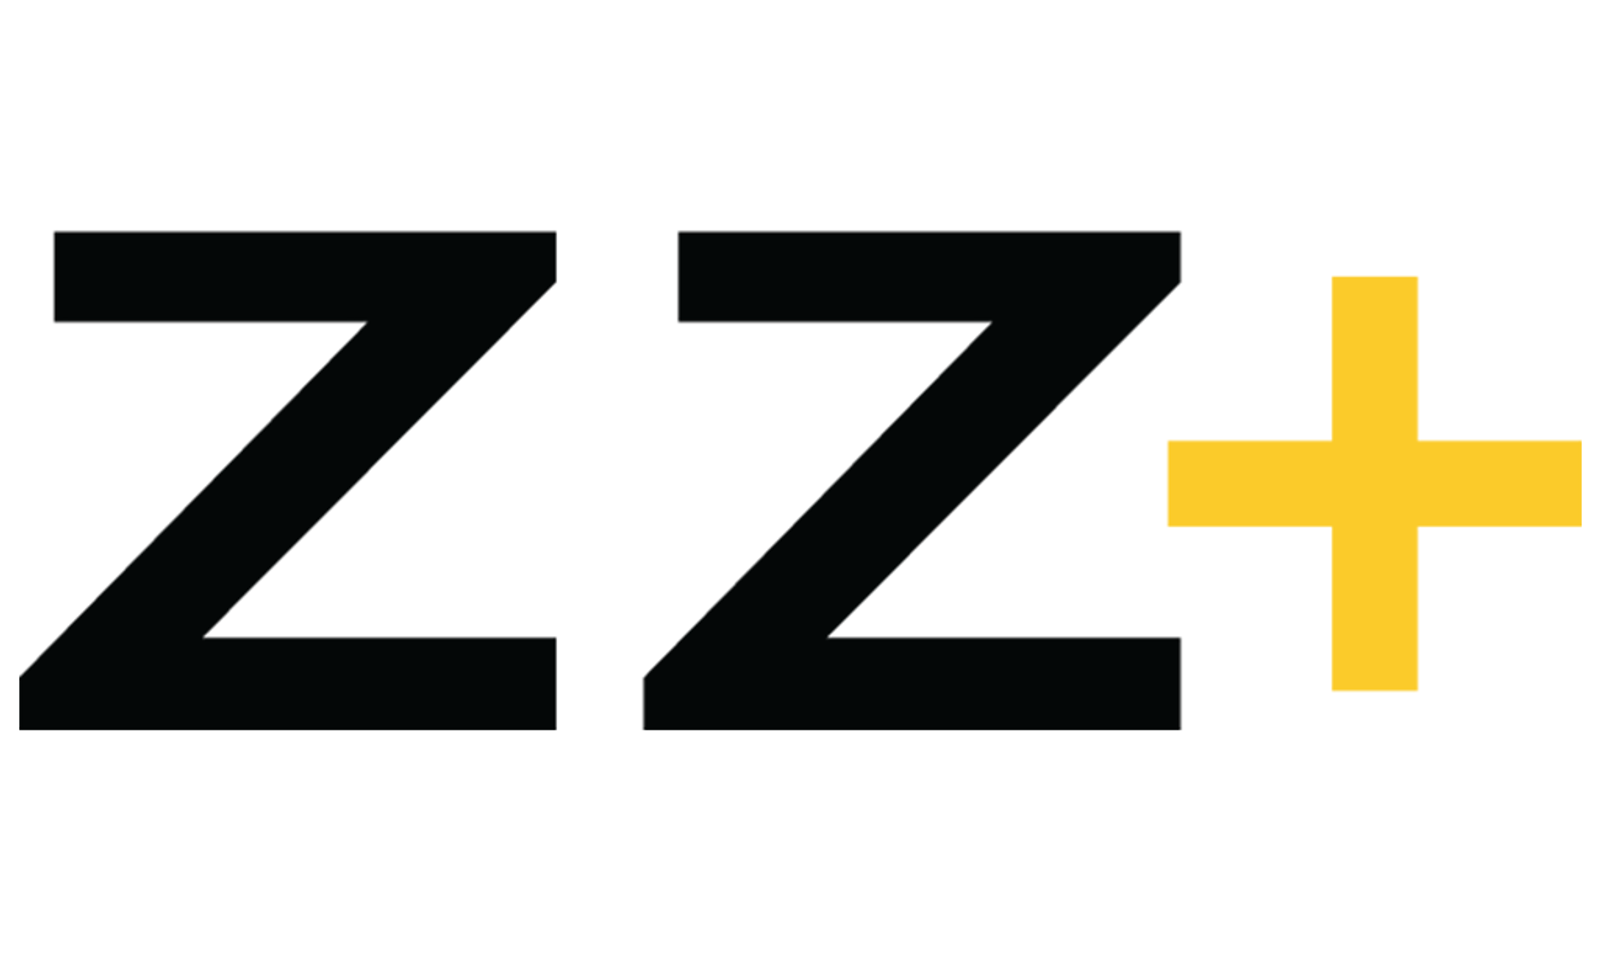 Brazzers+ Adds Direct Messaging to Platform